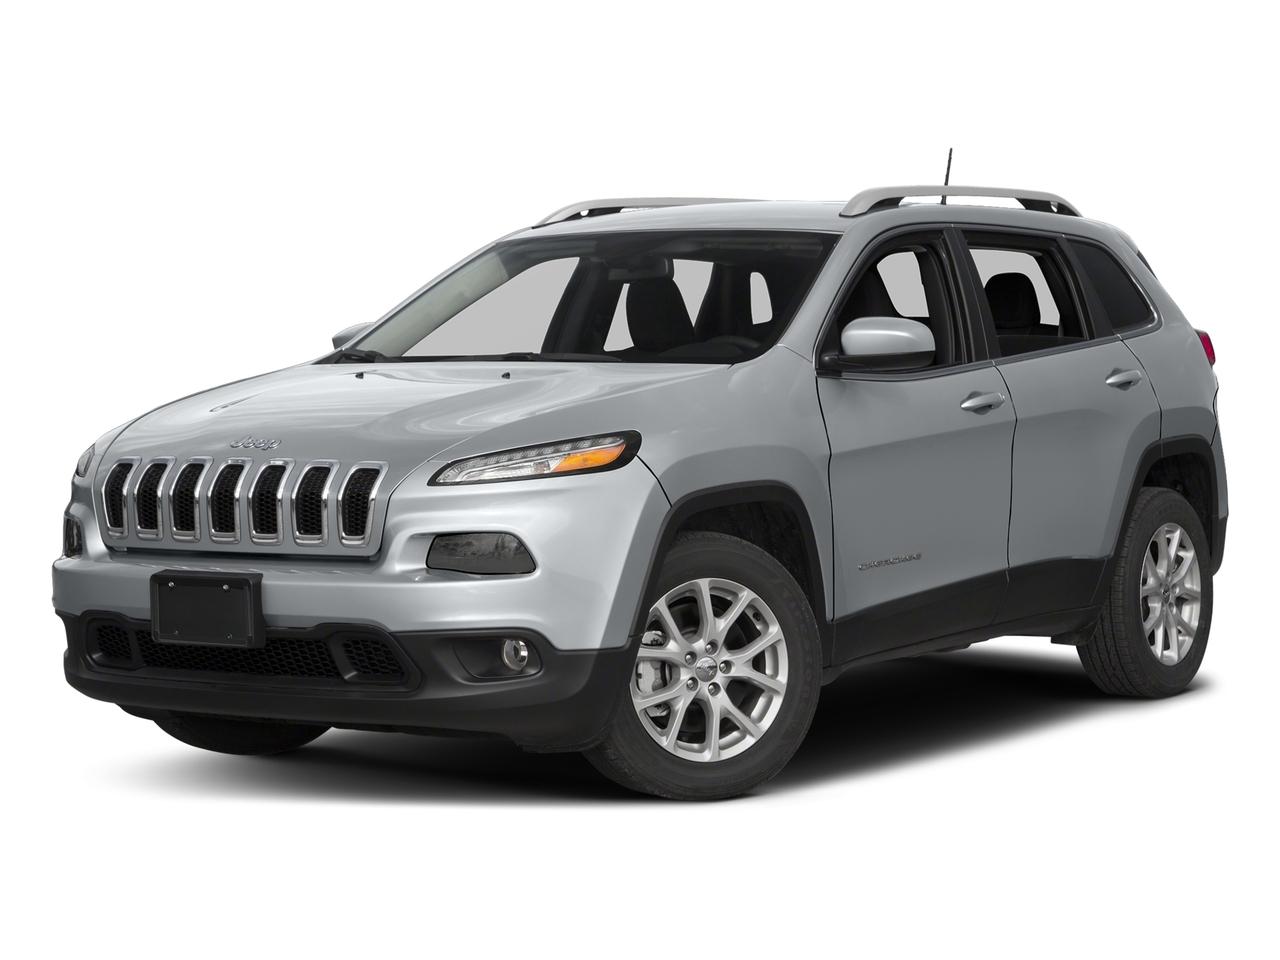 2016 Jeep Cherokee Vehicle Photo in Plainfield, IL 60586